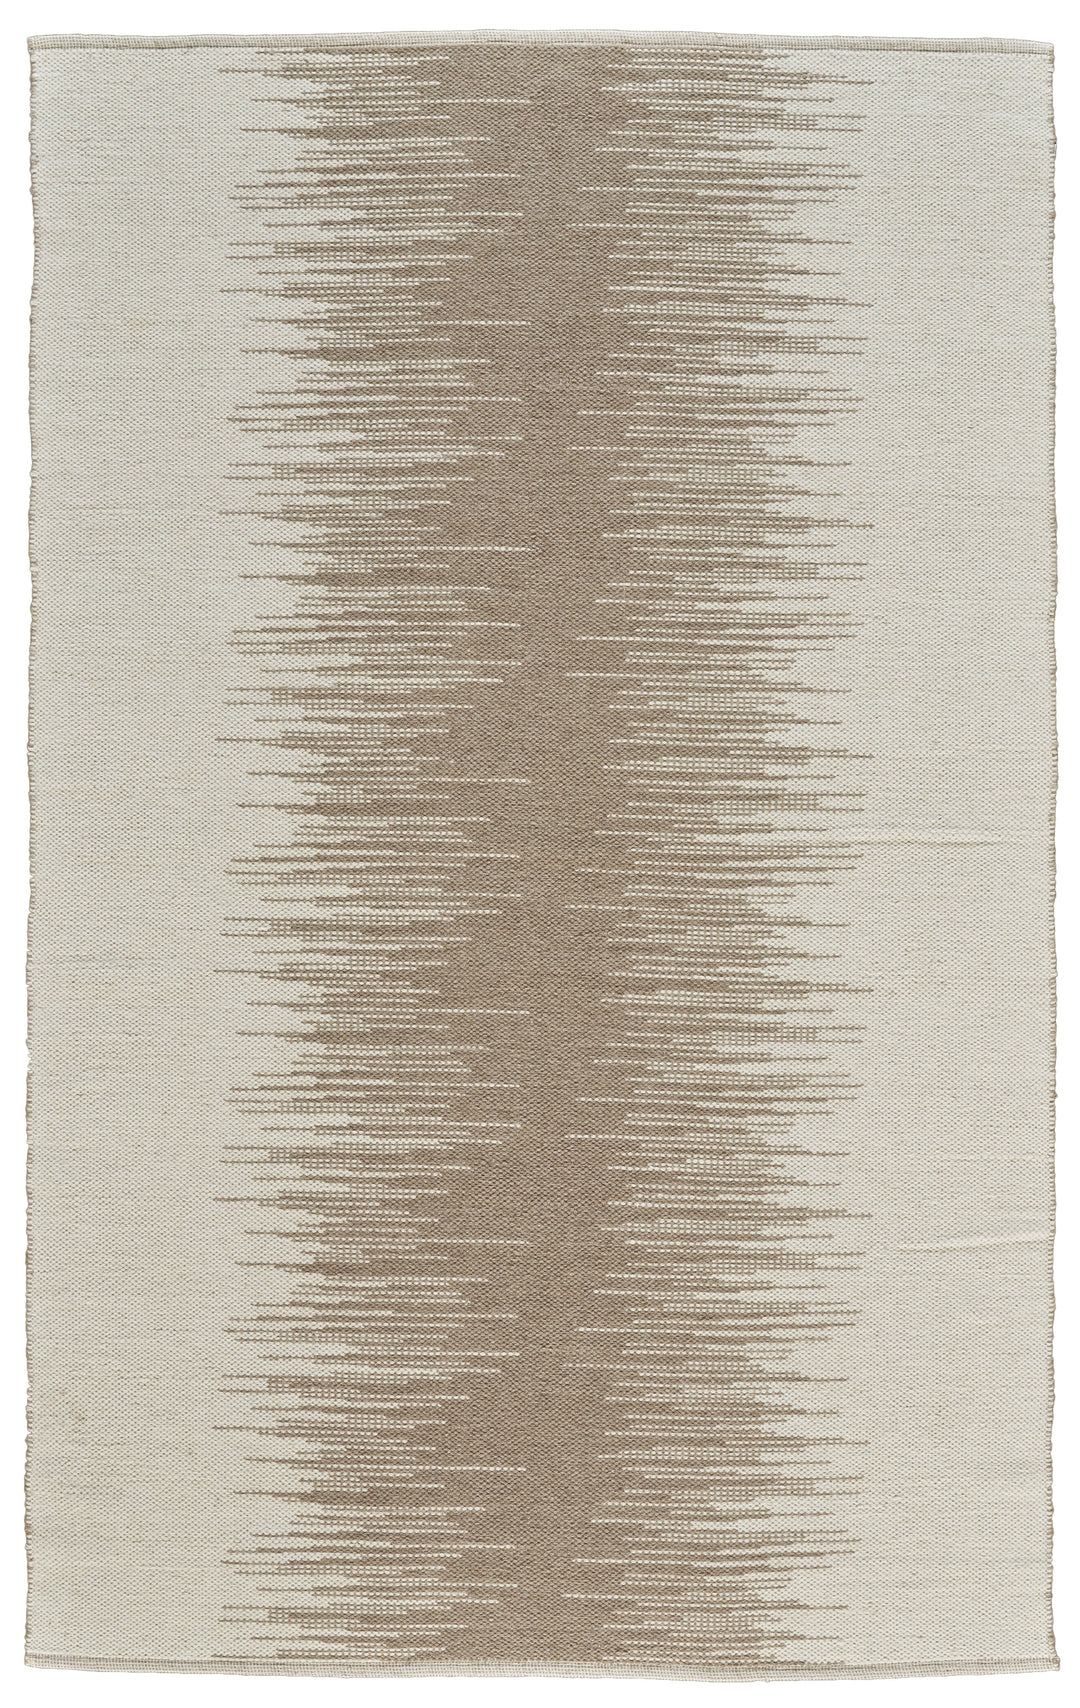 Feizy Feizy Bashia Handmade Linear Wool Rug - Ivory & Taupe - Available in 4 Sizes